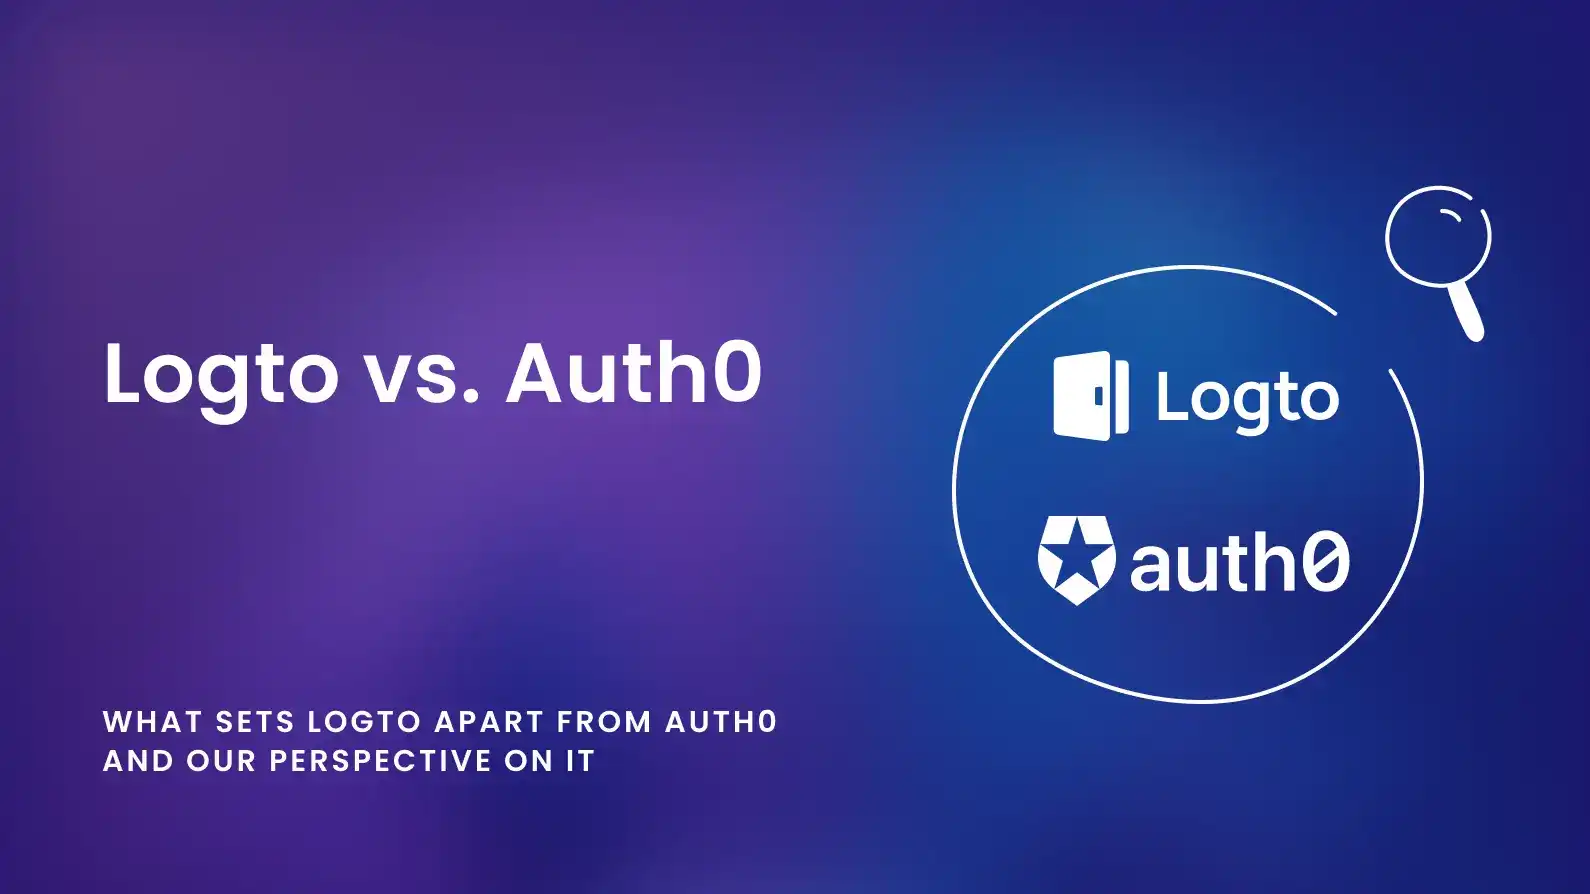 What sets Logto apart from Auth0 and our perspective on it